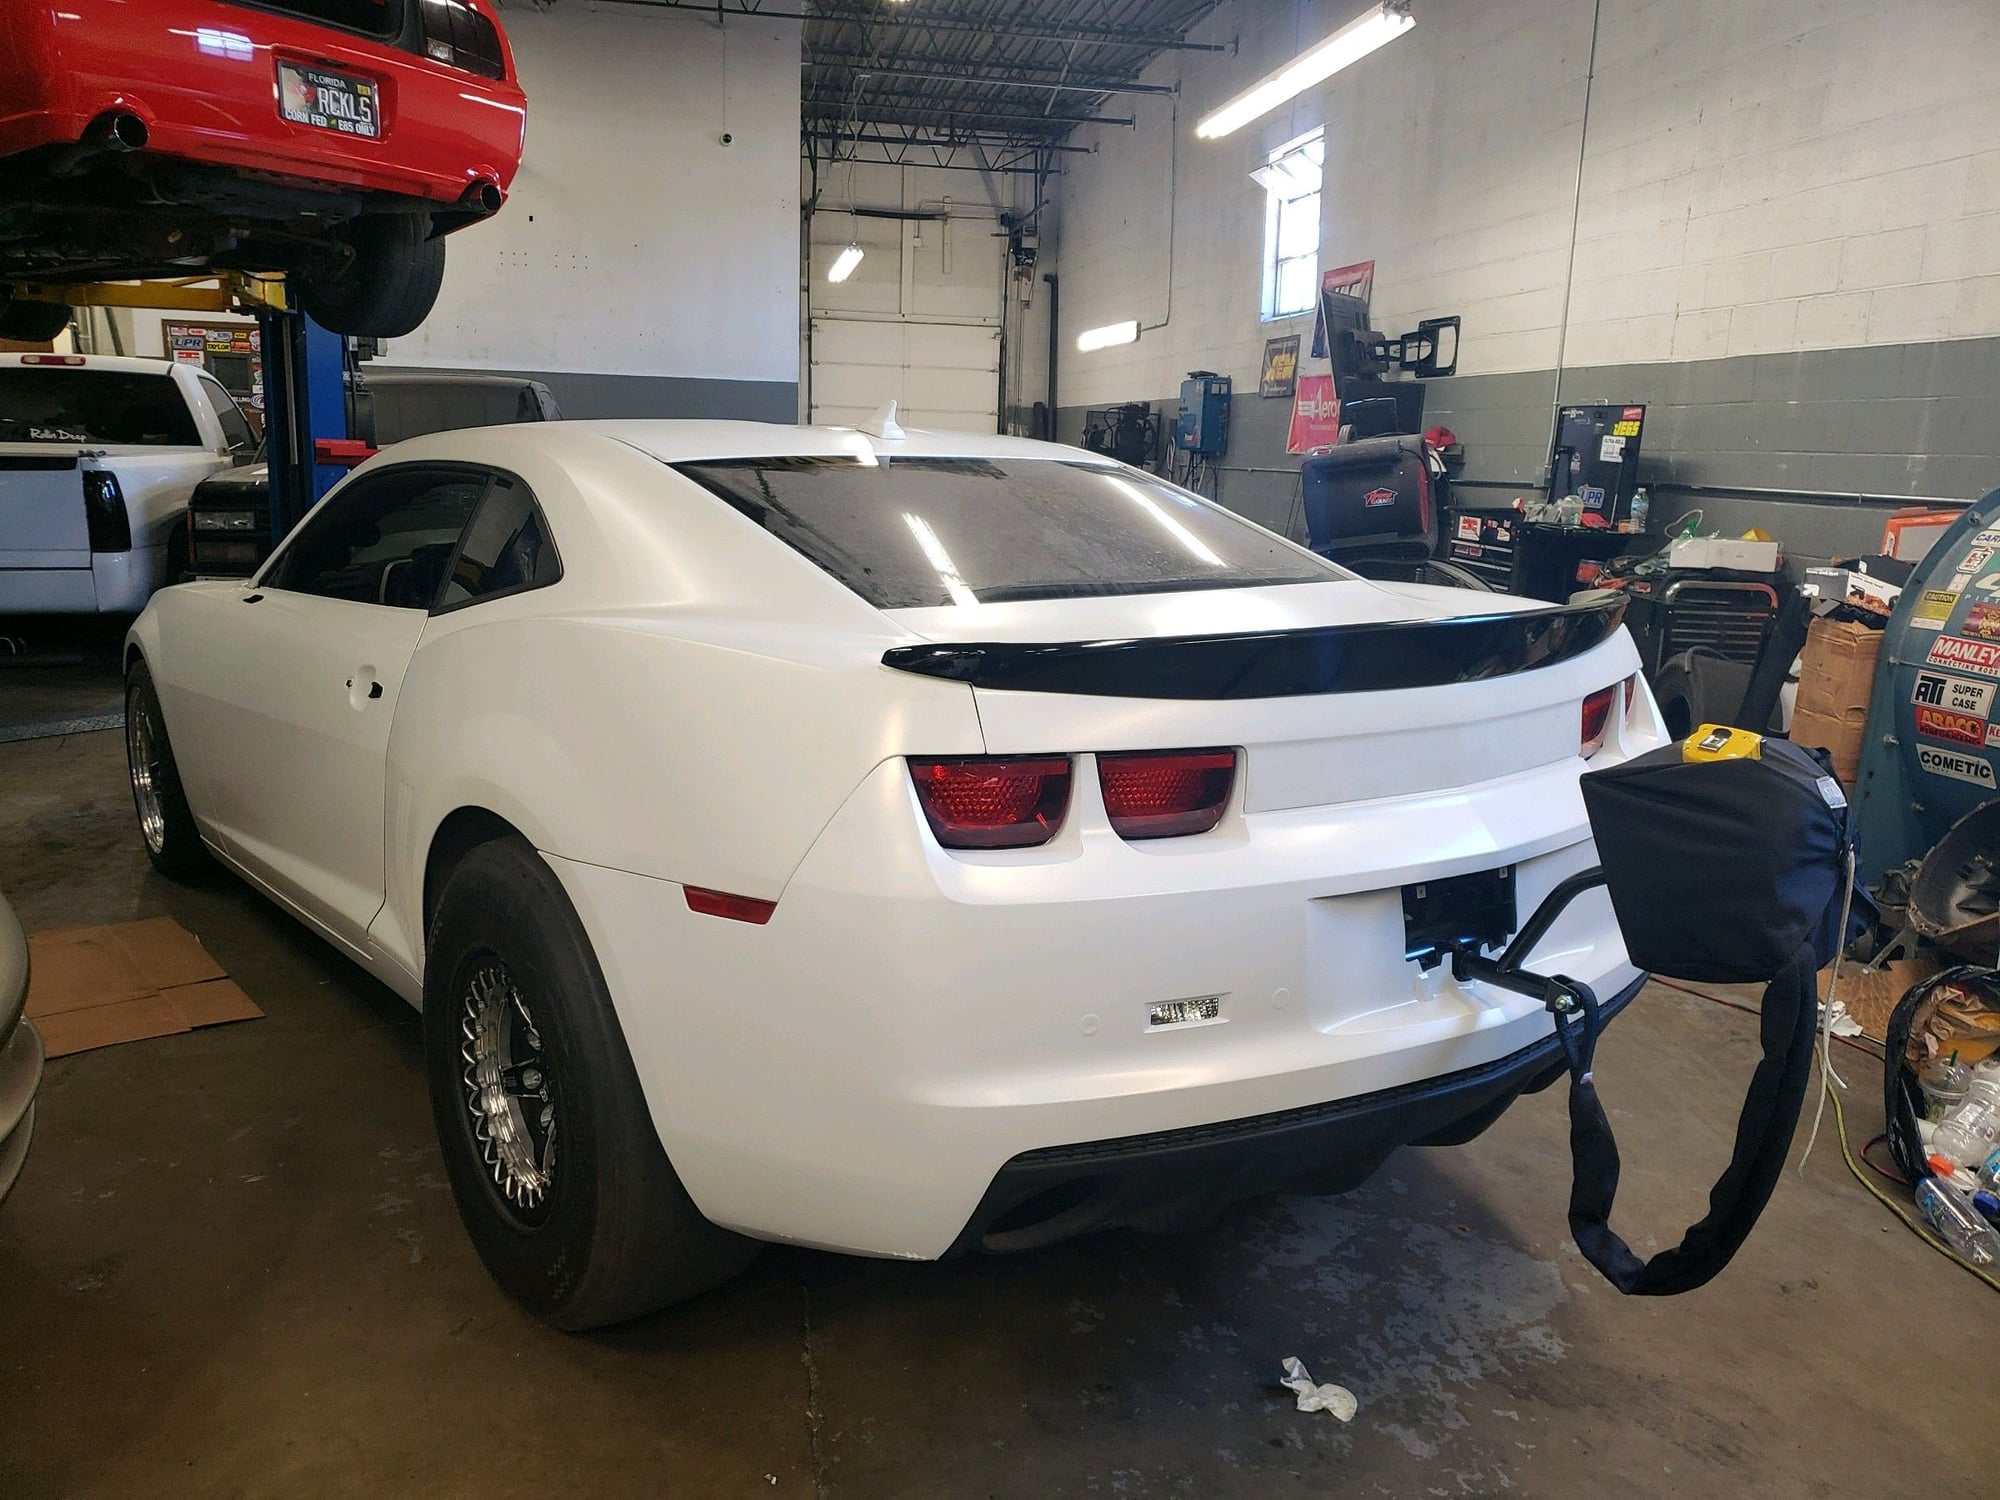 2011 Chevrolet Camaro - 2011 Camaro SS 427 LSx/ TH400/ Holley EFI/ Weld/ Nitrous Etc.. - Used - VIN 2G1Ft1ew3b9137696 - 7,700 Miles - 8 cyl - 2WD - Automatic - Coupe - Black - Northbrook, IL 60062, United States